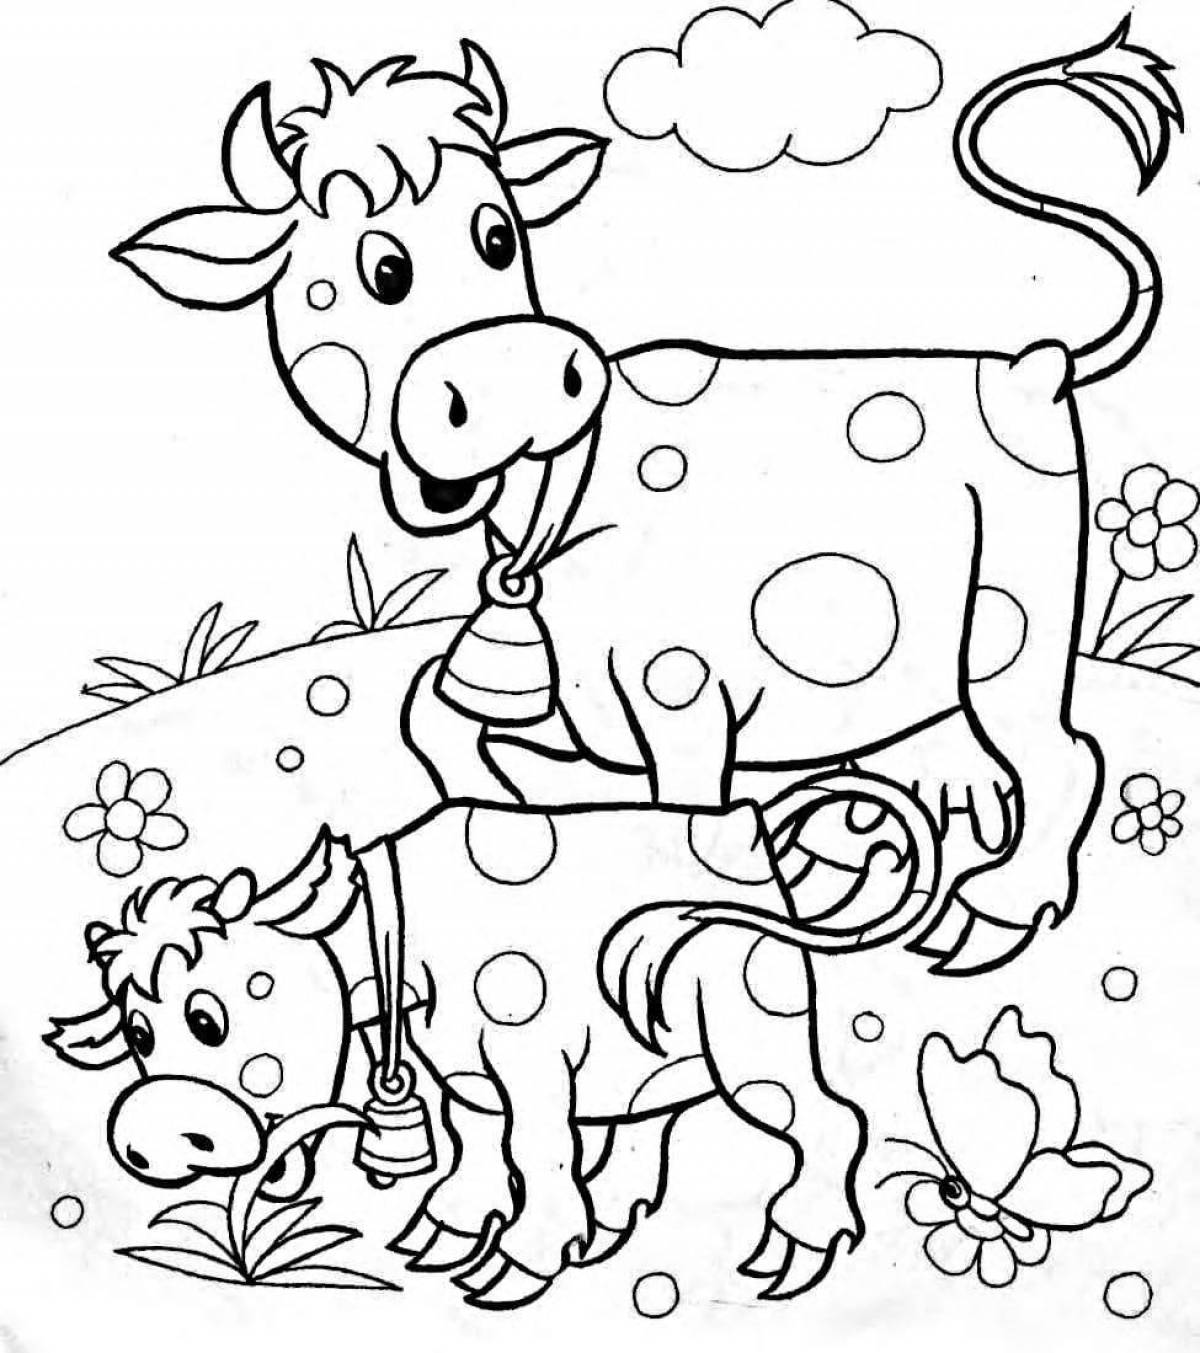 Bright cow coloring book for children 5-6 years old